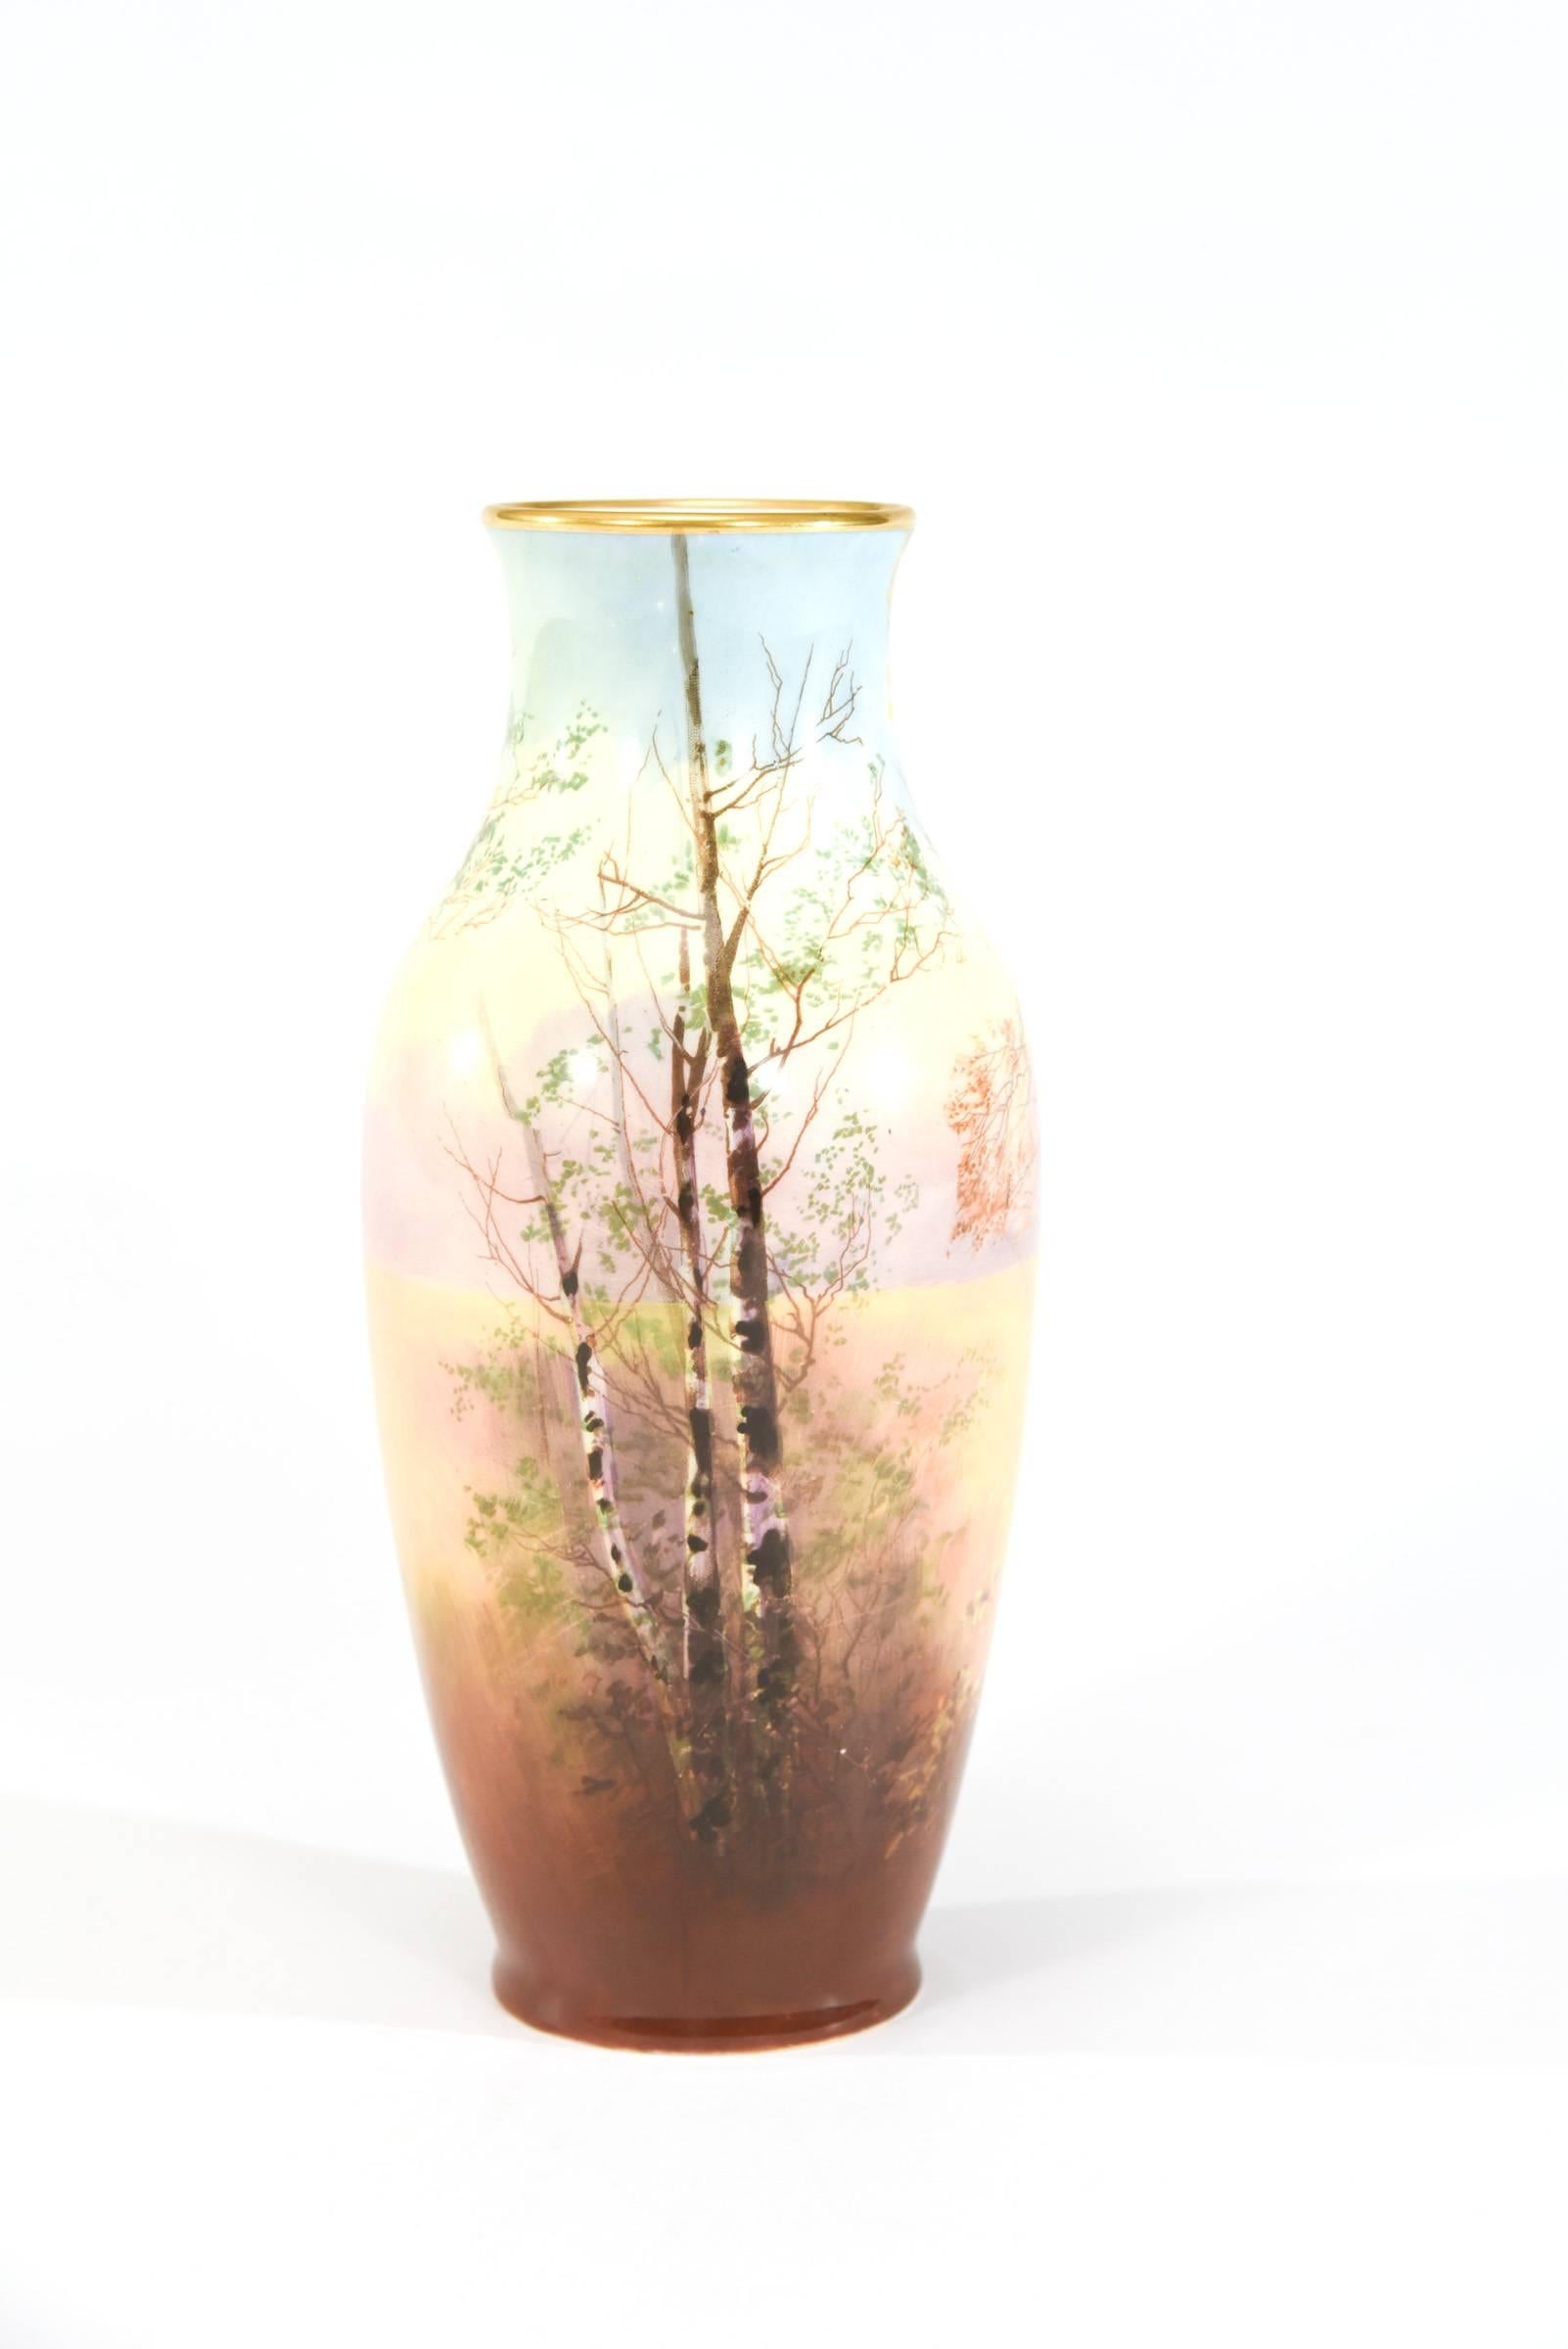 This finely decorated porcelain vase was made by Royal Doulton and is hand painted and artist signed J. Price. He was known for his beautiful landscapes and this vase is decorated on the entire circumference. Featuring a stand of silver birch trees